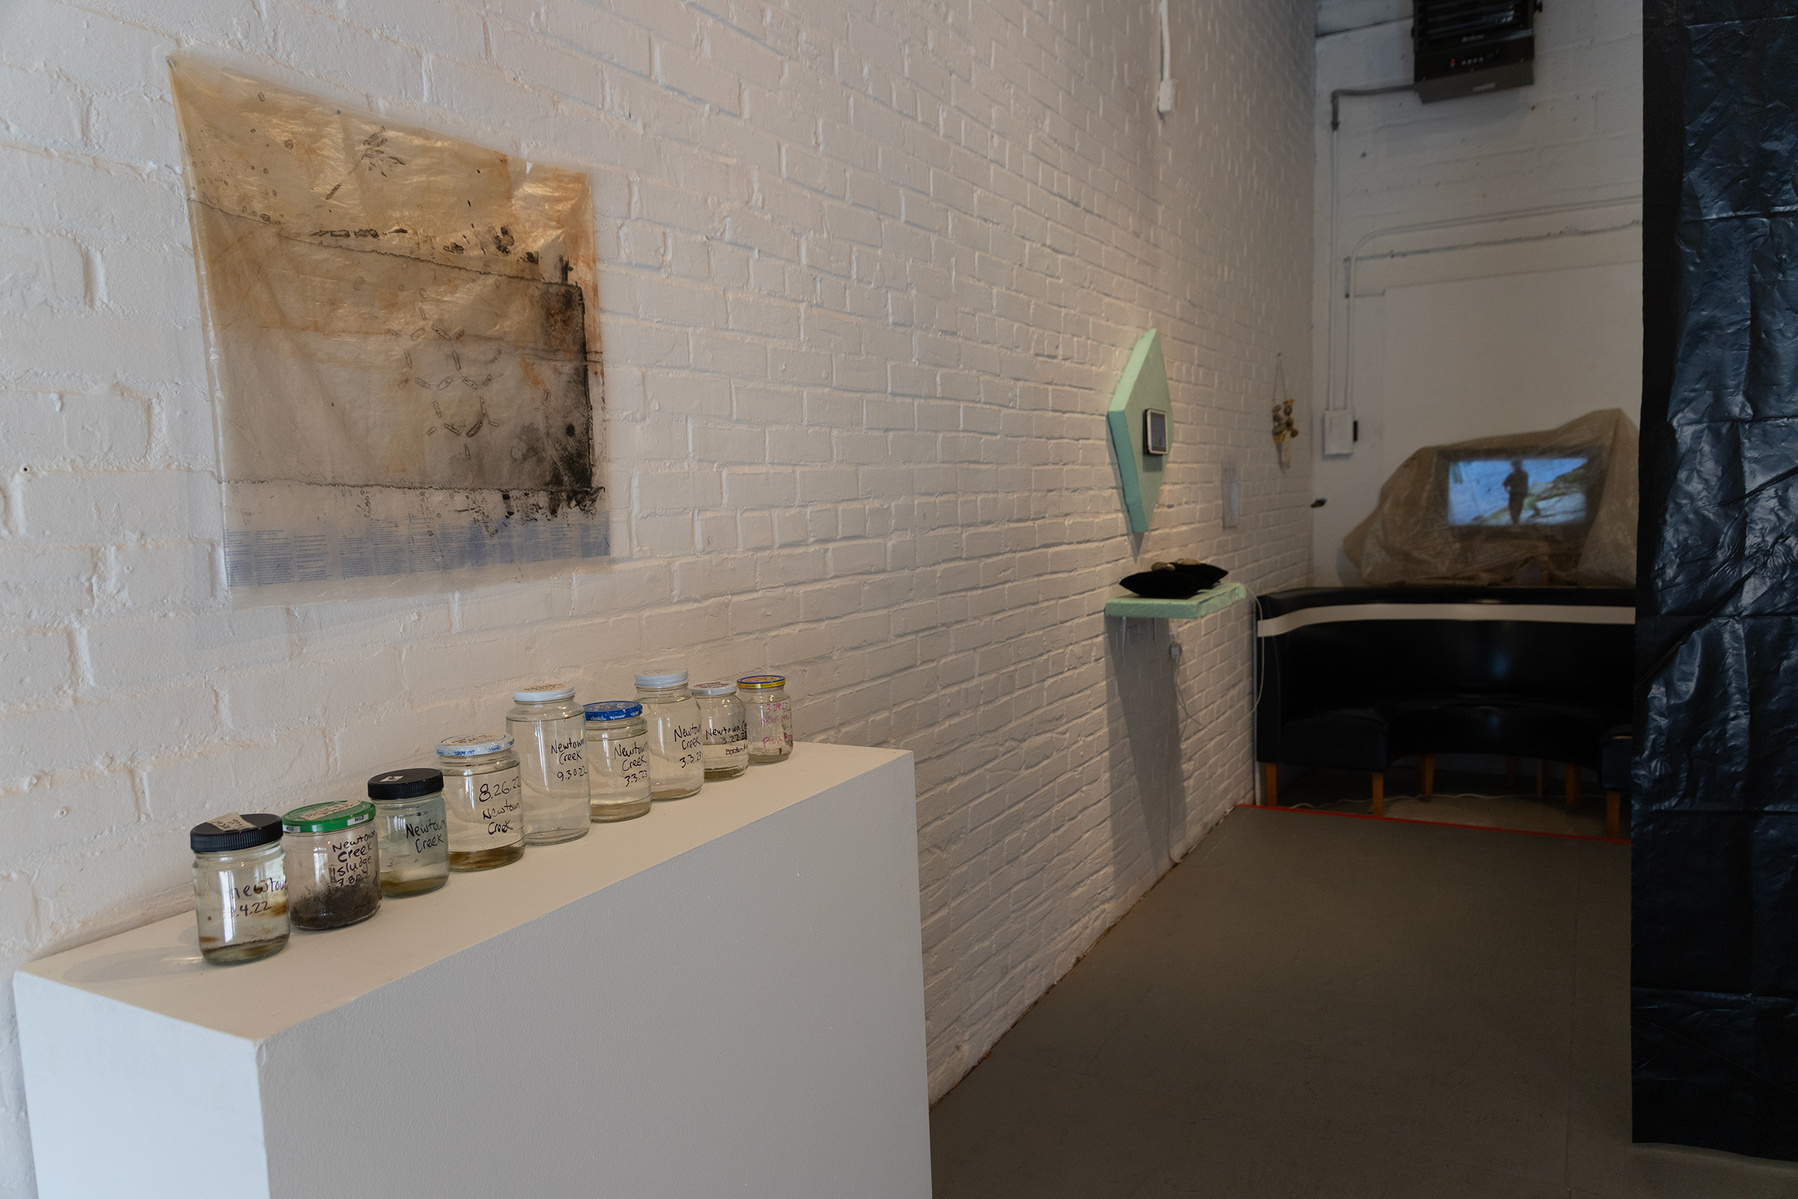 Works from Priscilla Stadler's SLUDGE project, an art installation created in response to research about the toxic waterway Newtown Creek, NYC. On the left, "Troubled Waters 11" on wall, "Samples" is jars of Creek water on pedestal.